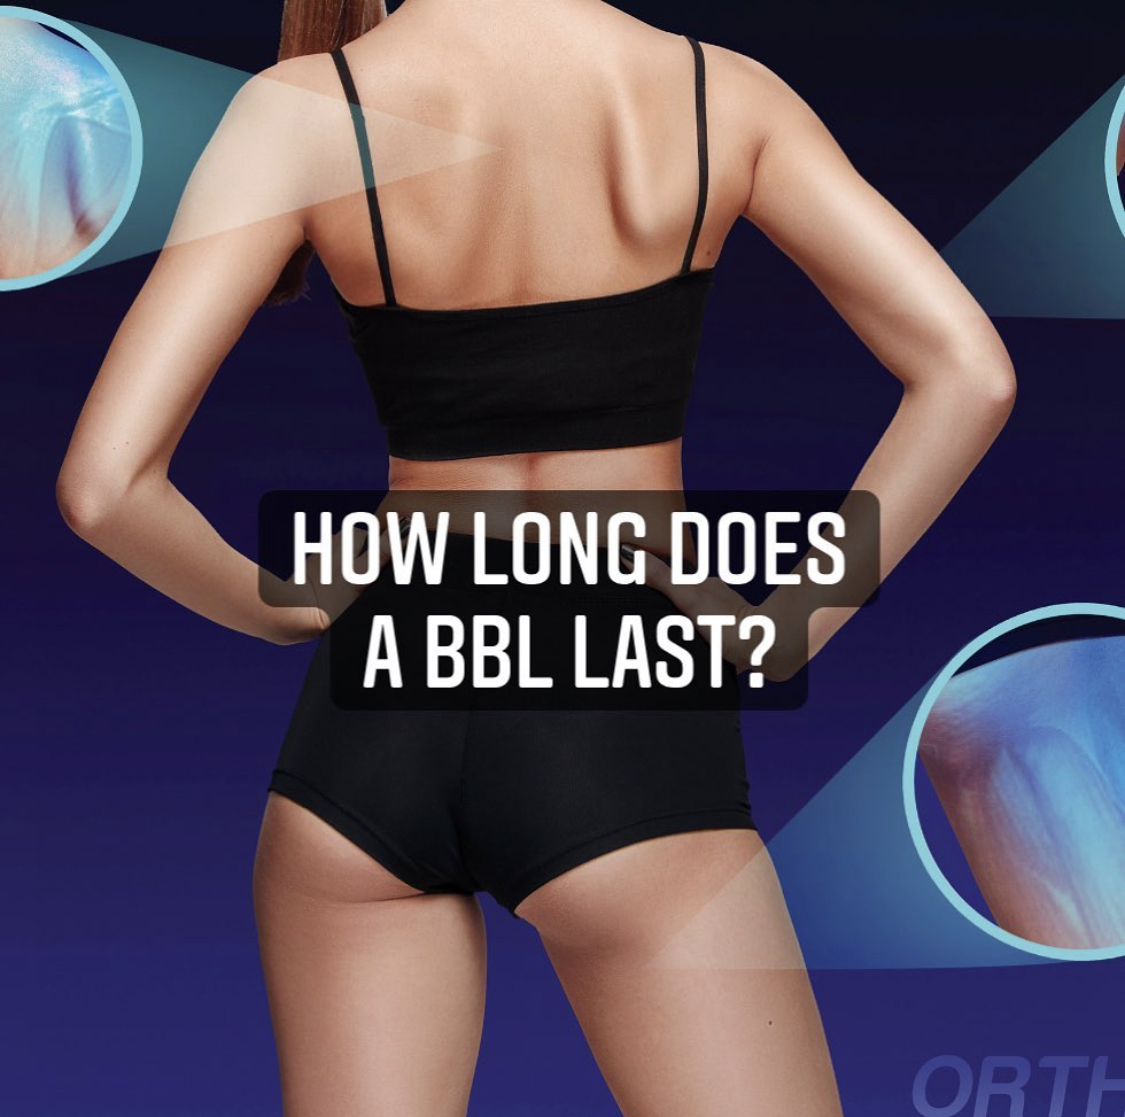 How Long Does a BBL Last?